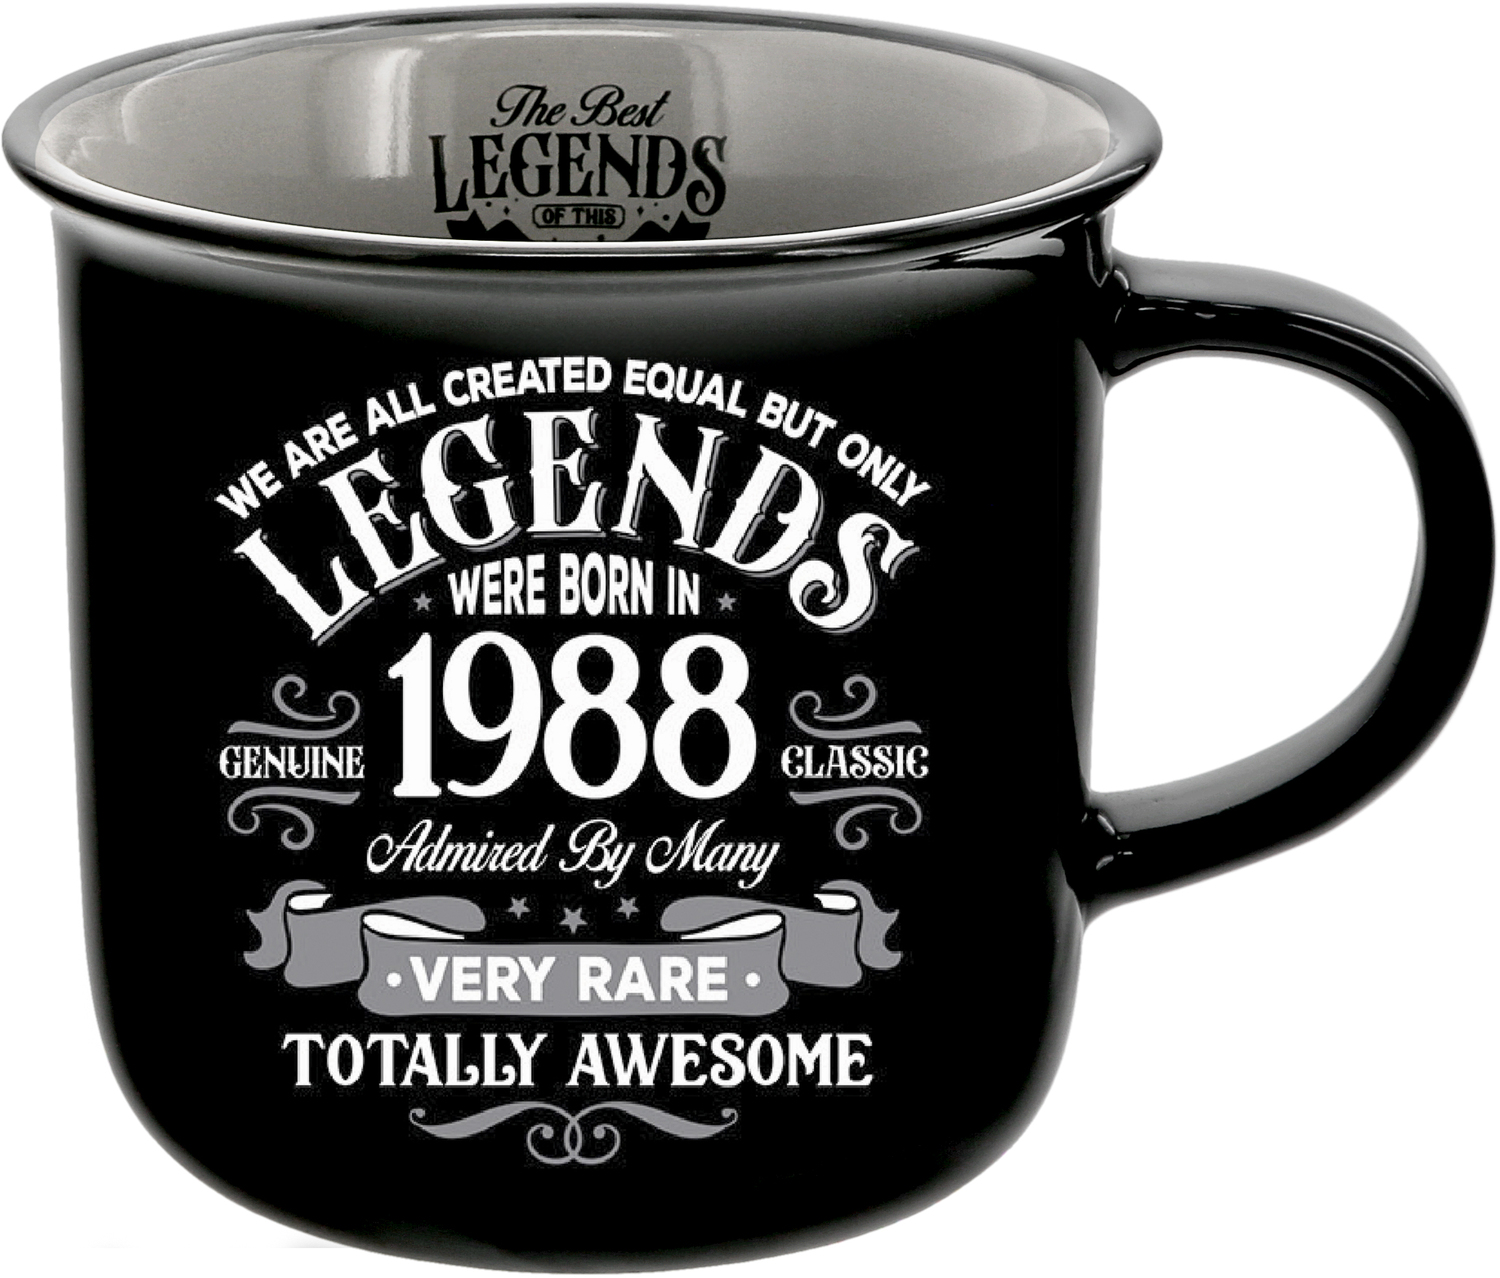 1988 by Legends of this World - 1988 - 13 oz Mug